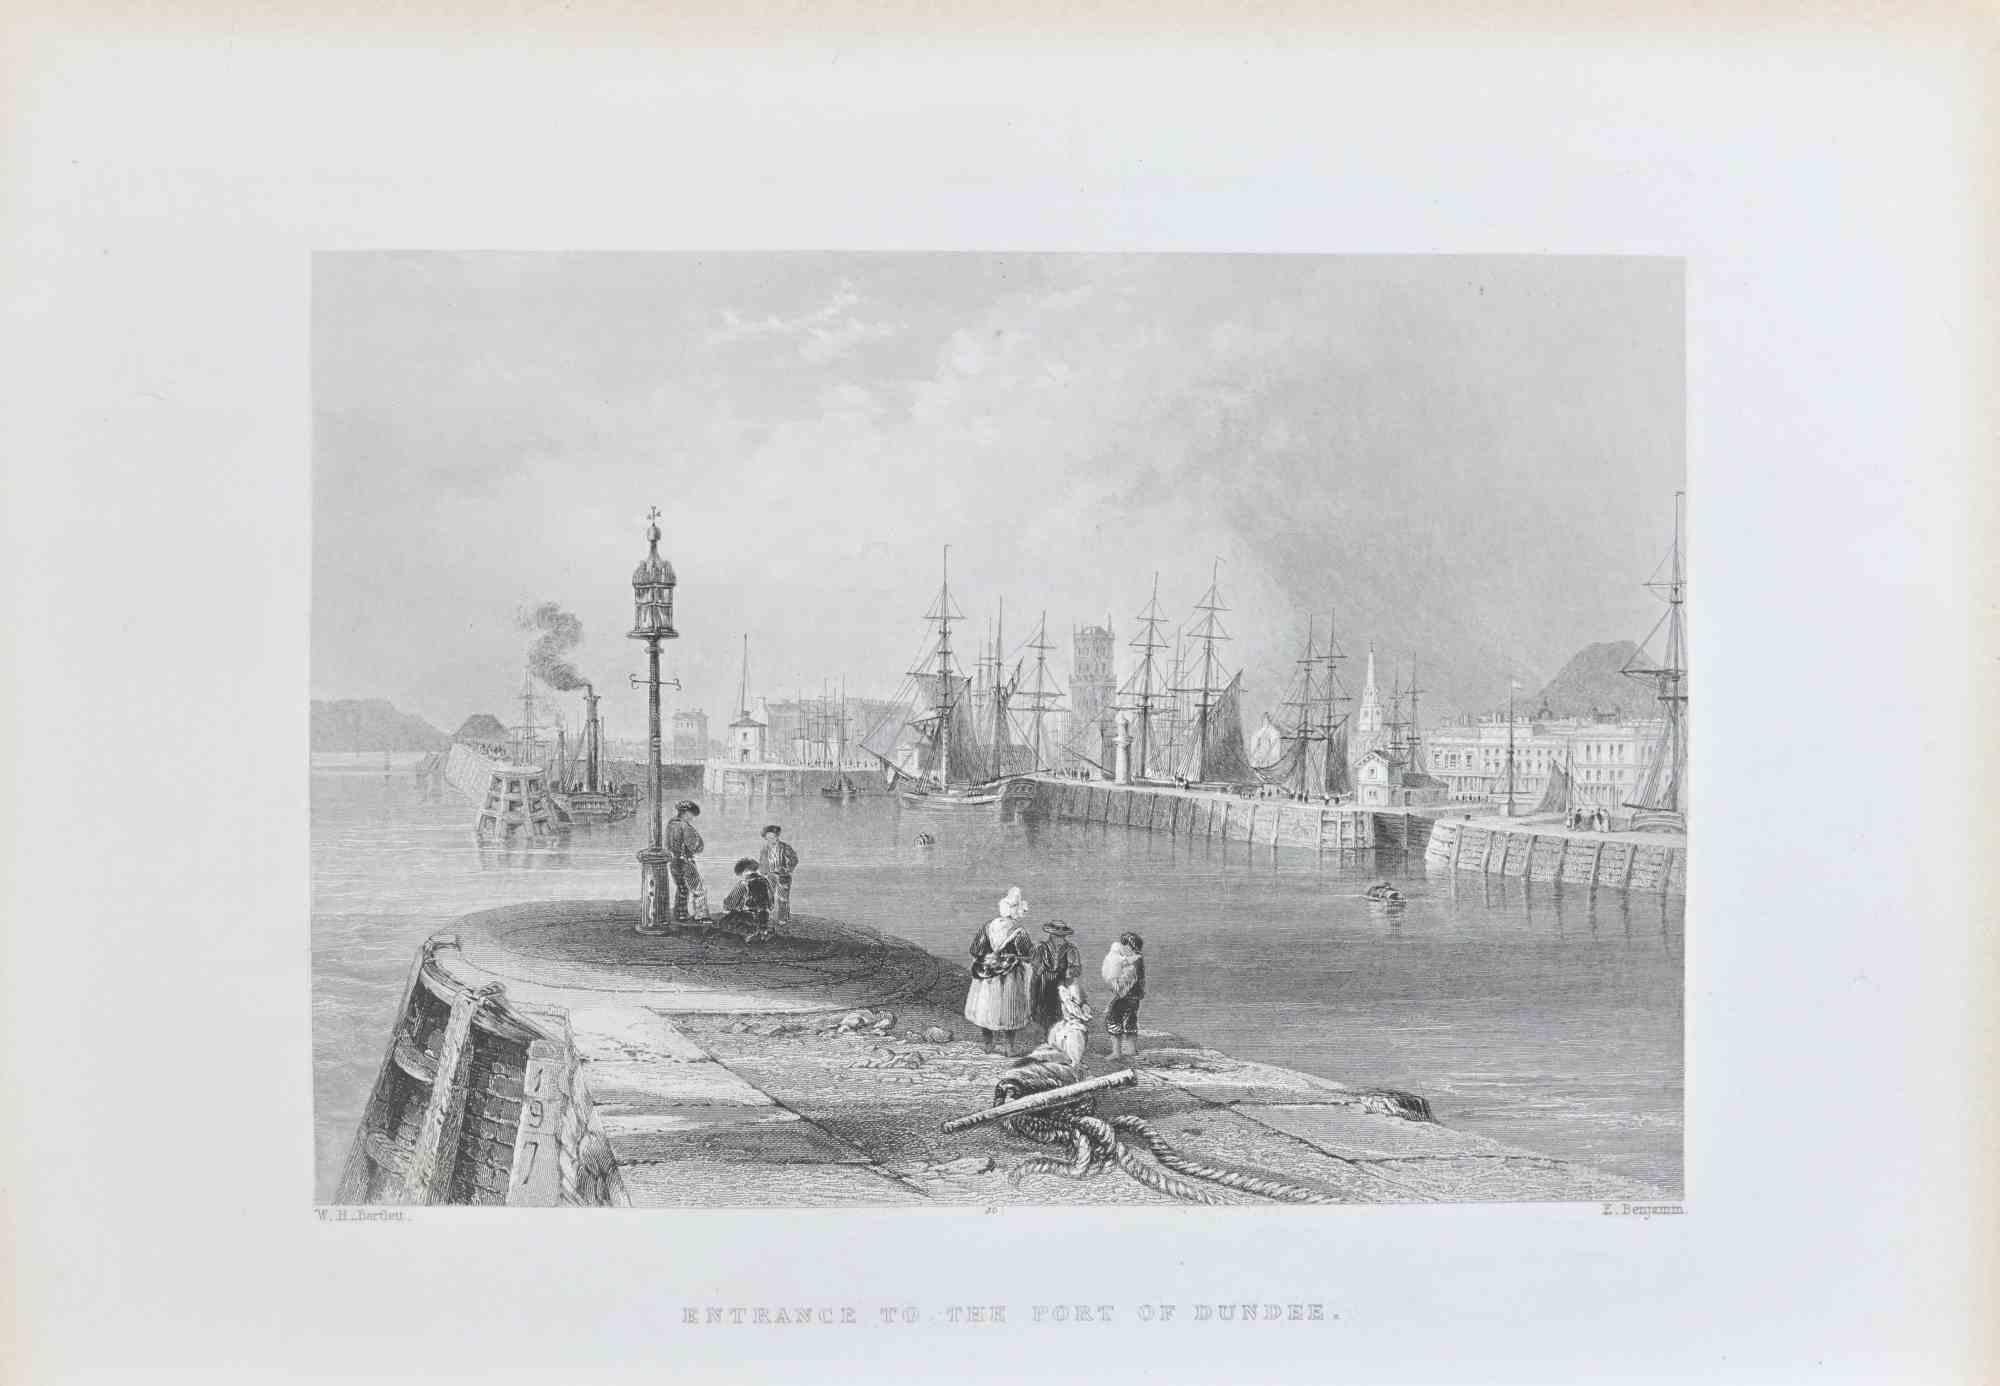 Entrance to the Port of Dundee - Lithograph By W.H. Bartlett - 19th Century